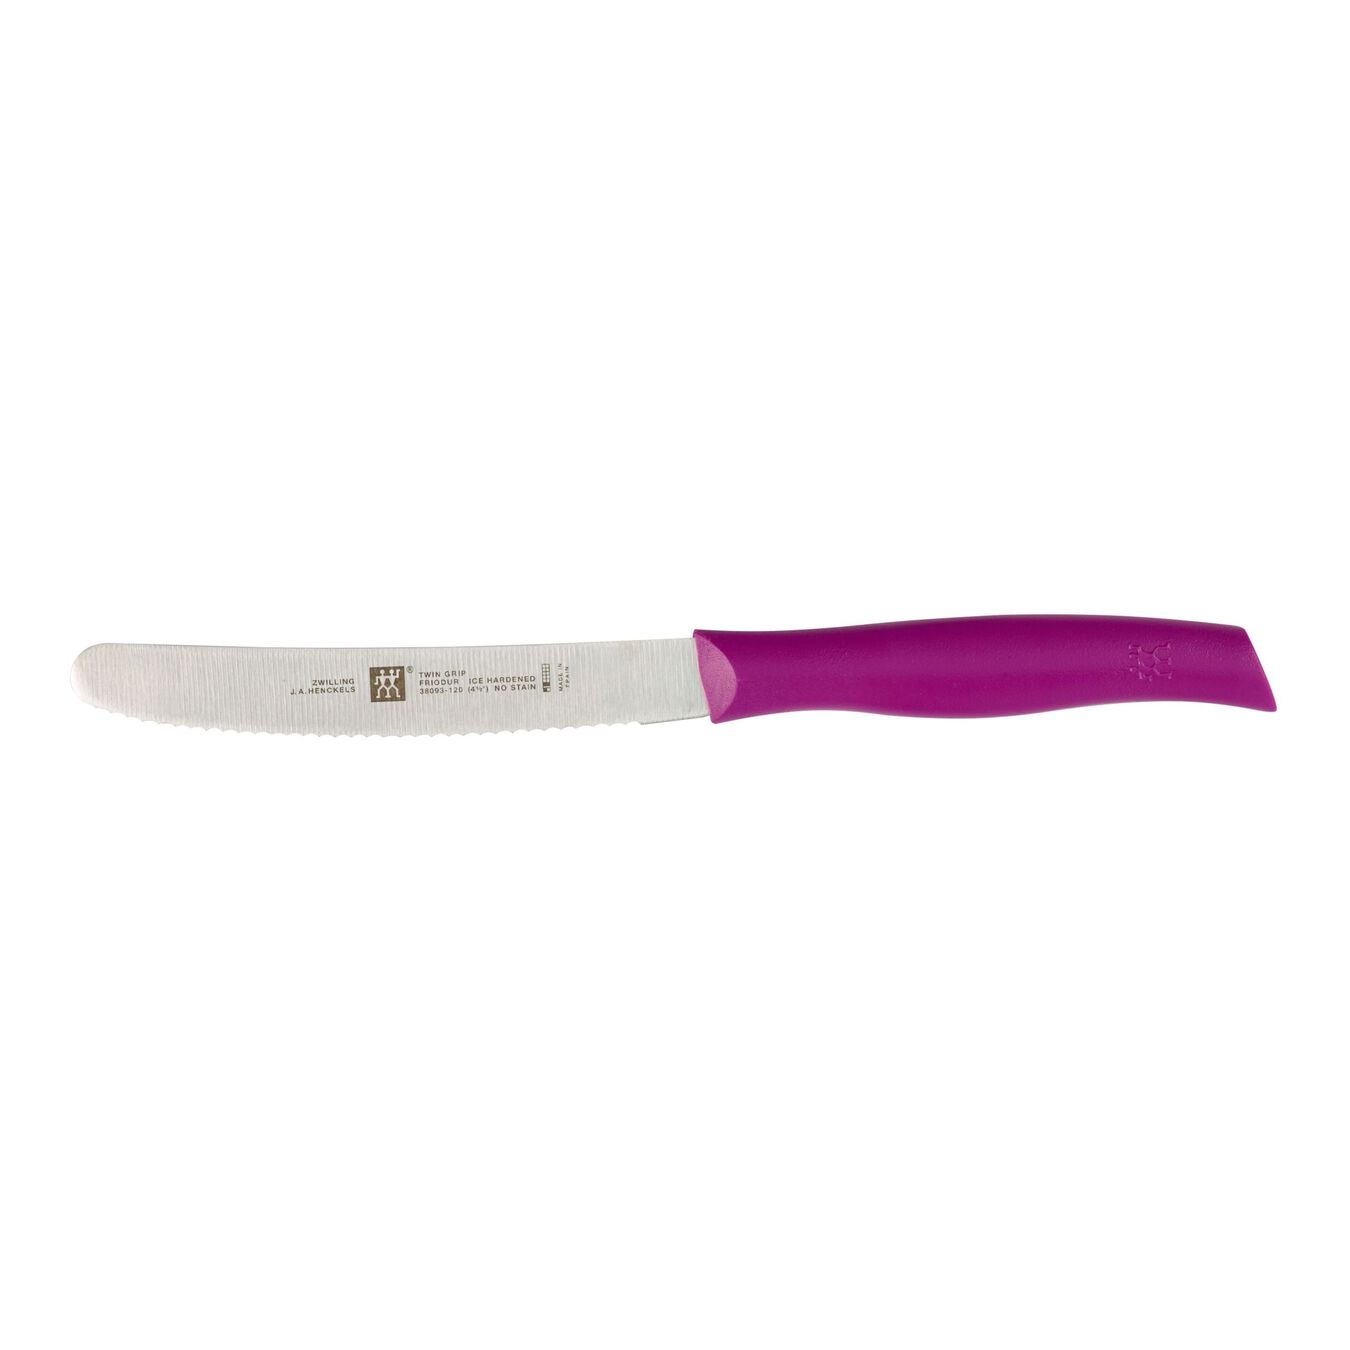 Zwilling Twin Grip Tomato / Bagel Knife with Scalloped Edge 4.5 inch - Pink